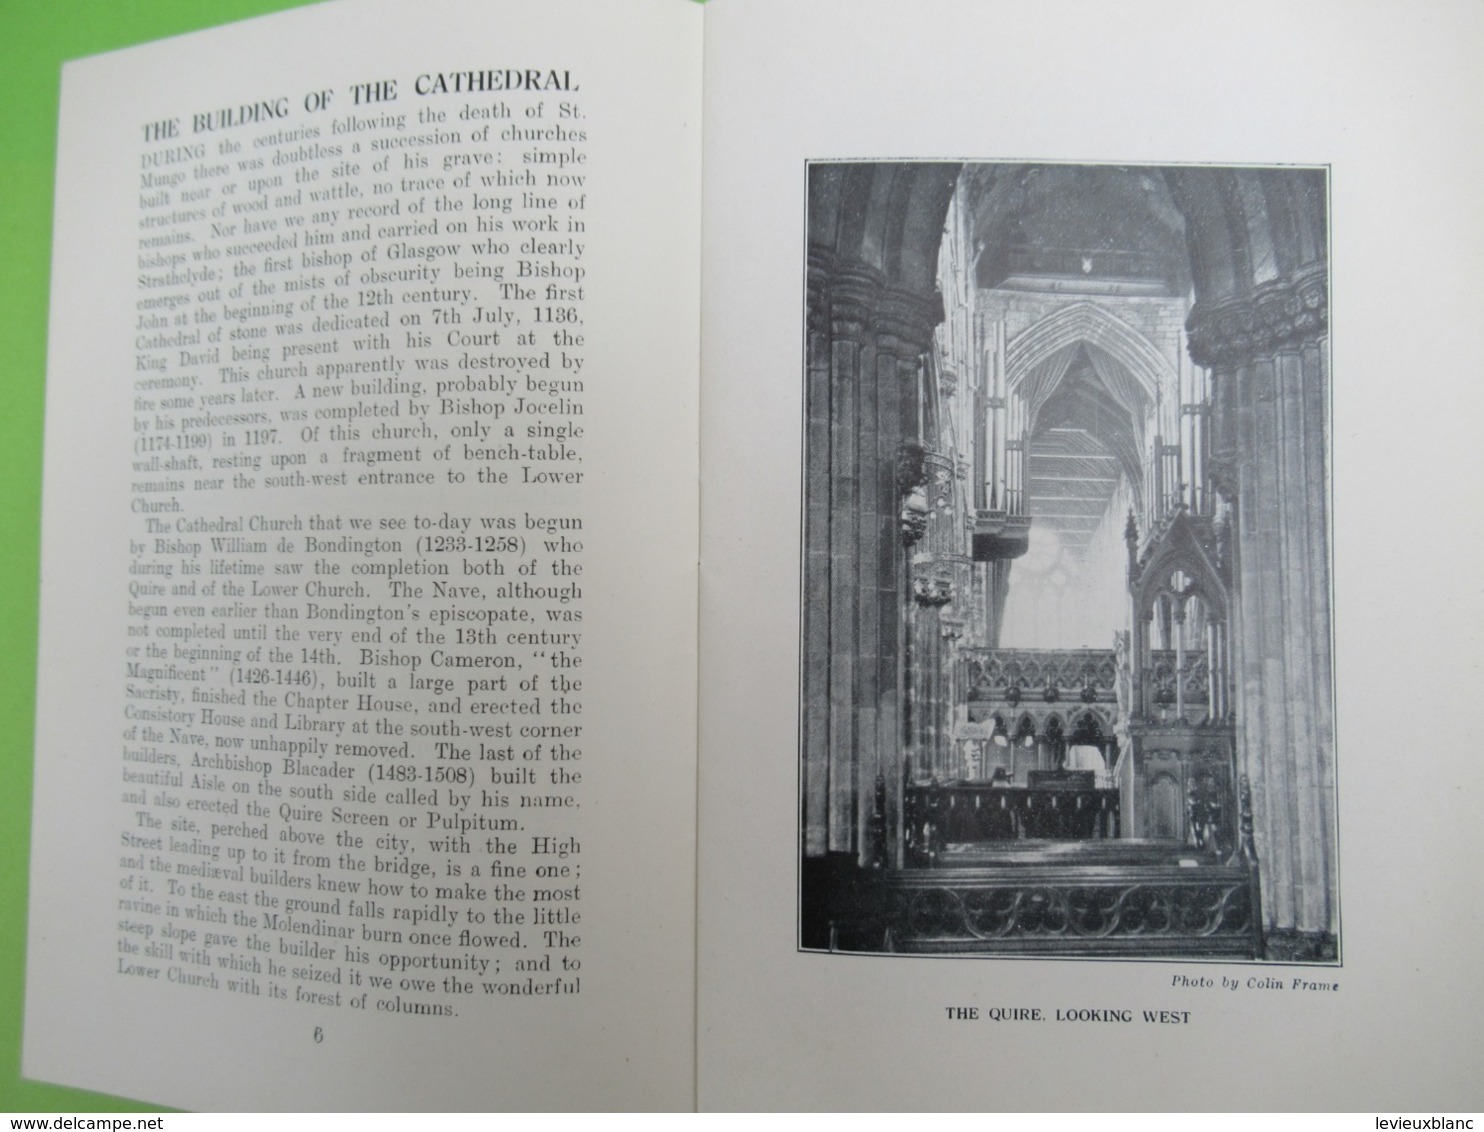 Guide Historique/A Short History And Guide/GLASGOW CATHEDRAL/A Nevile Davidson/Minister Of Glasgow/1938          PGC383 - Architecture